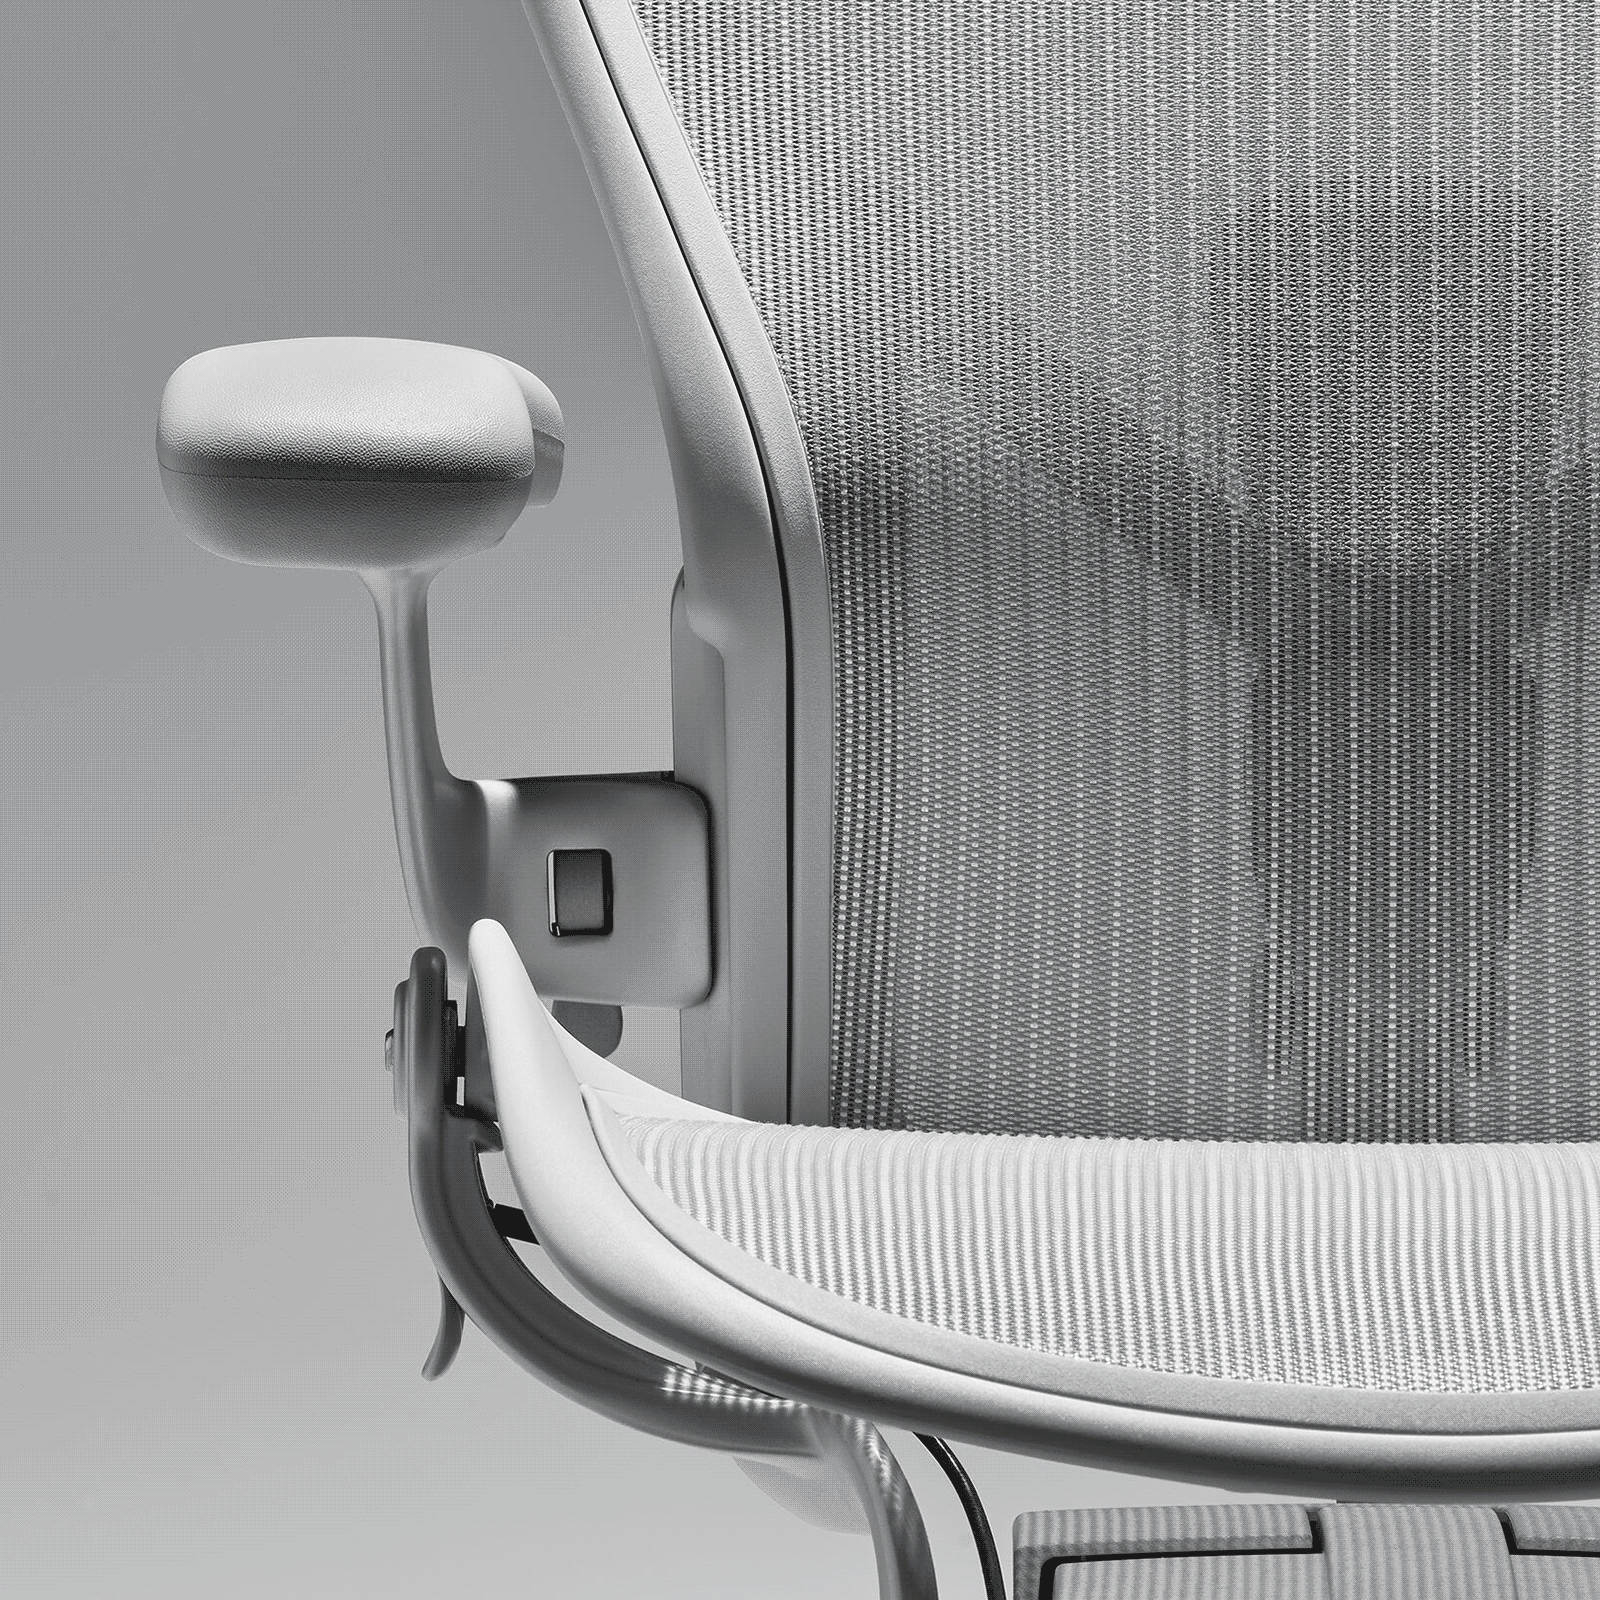 https://www.hermanmiller.com/content/dam/hmicom/page_assets/products/aeron_chair/202106/it_prd_ovw_aeron_chair_02.gif.rendition.1600.1600.png